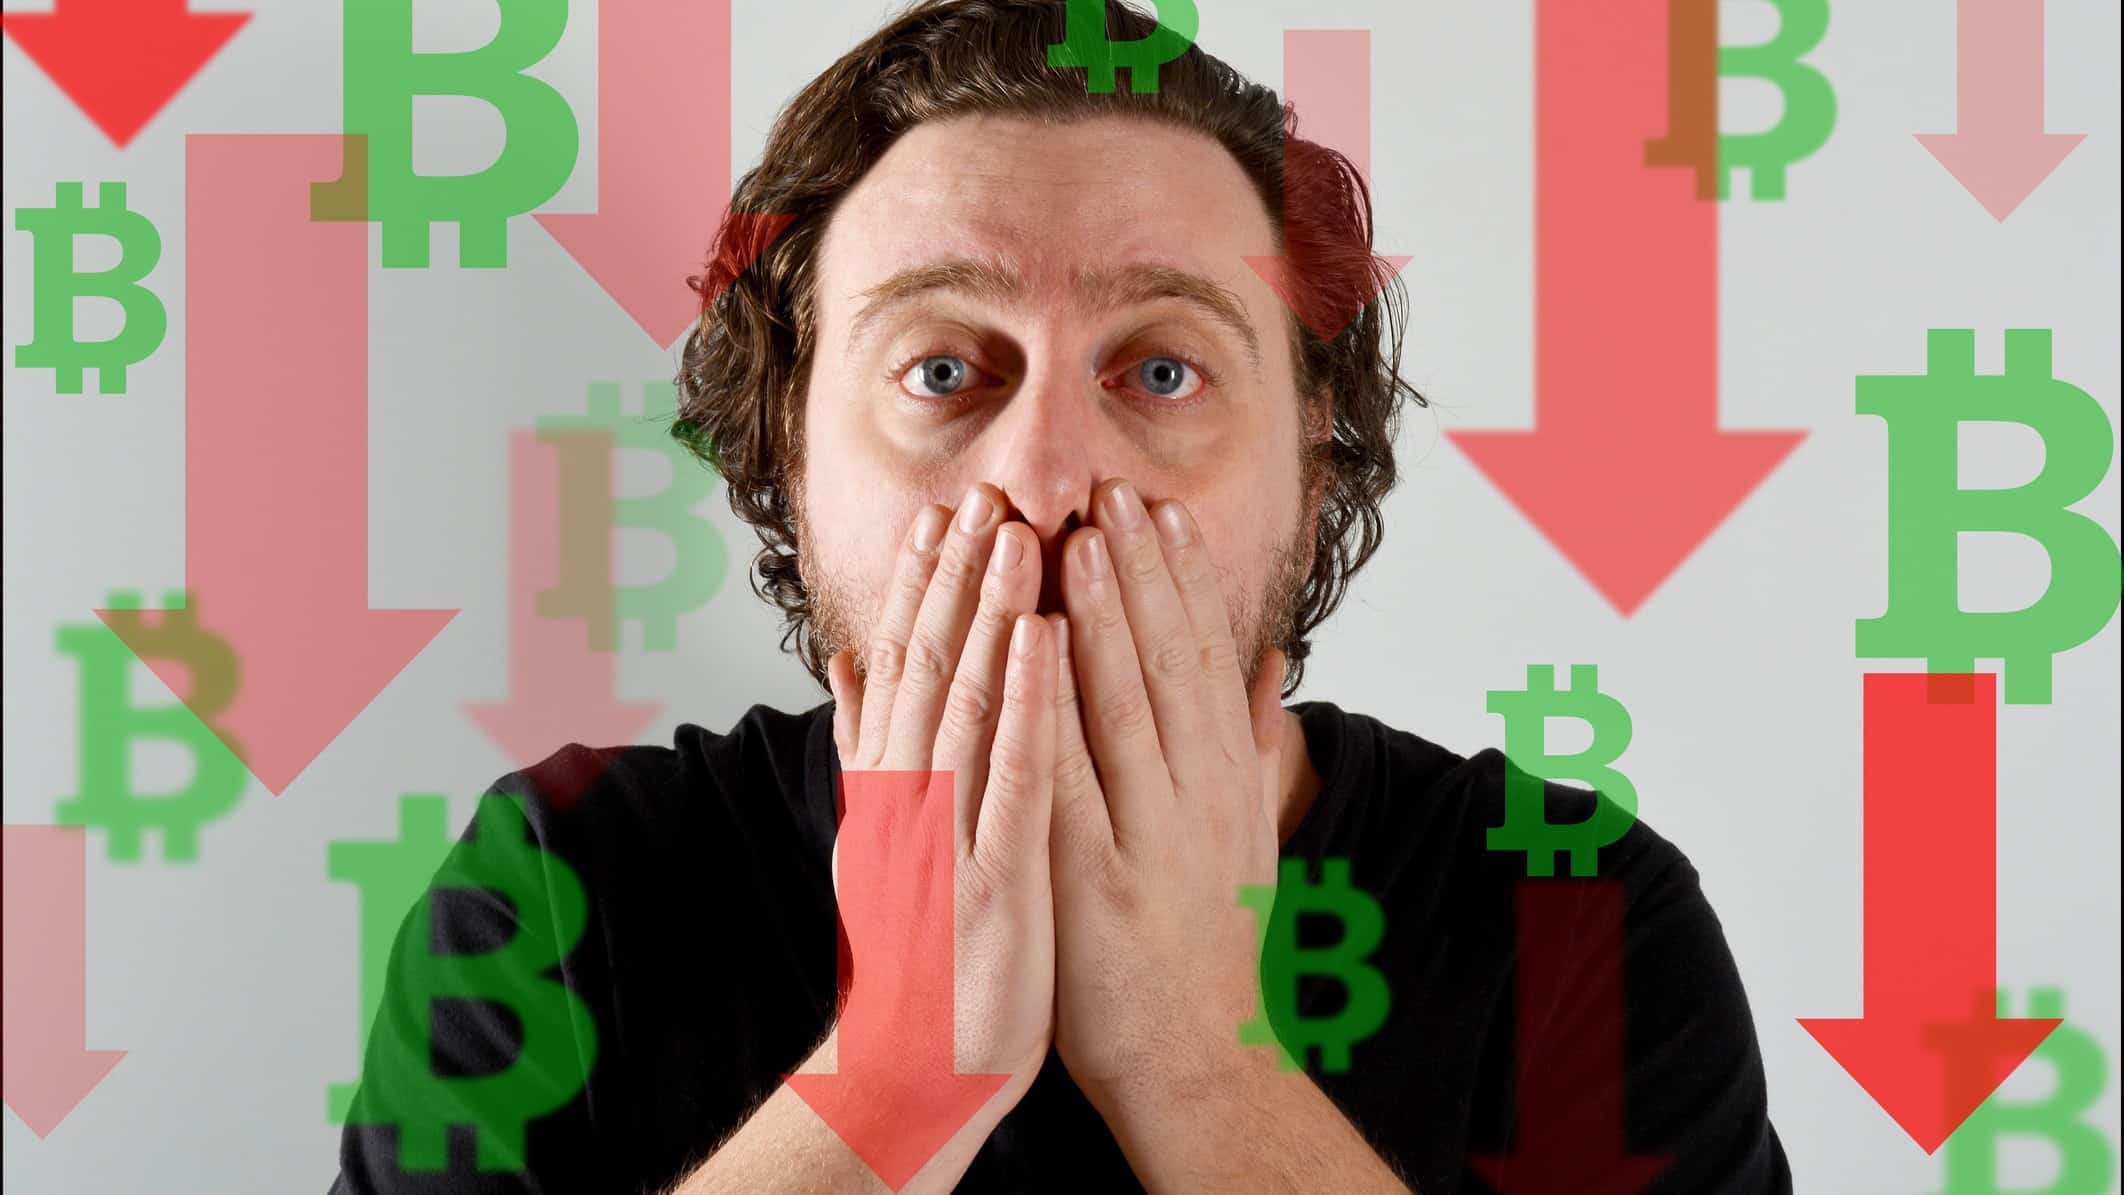 A bitcoin trader looks afraid and holds his hands to his mouth among graphics of red arrows pointing down